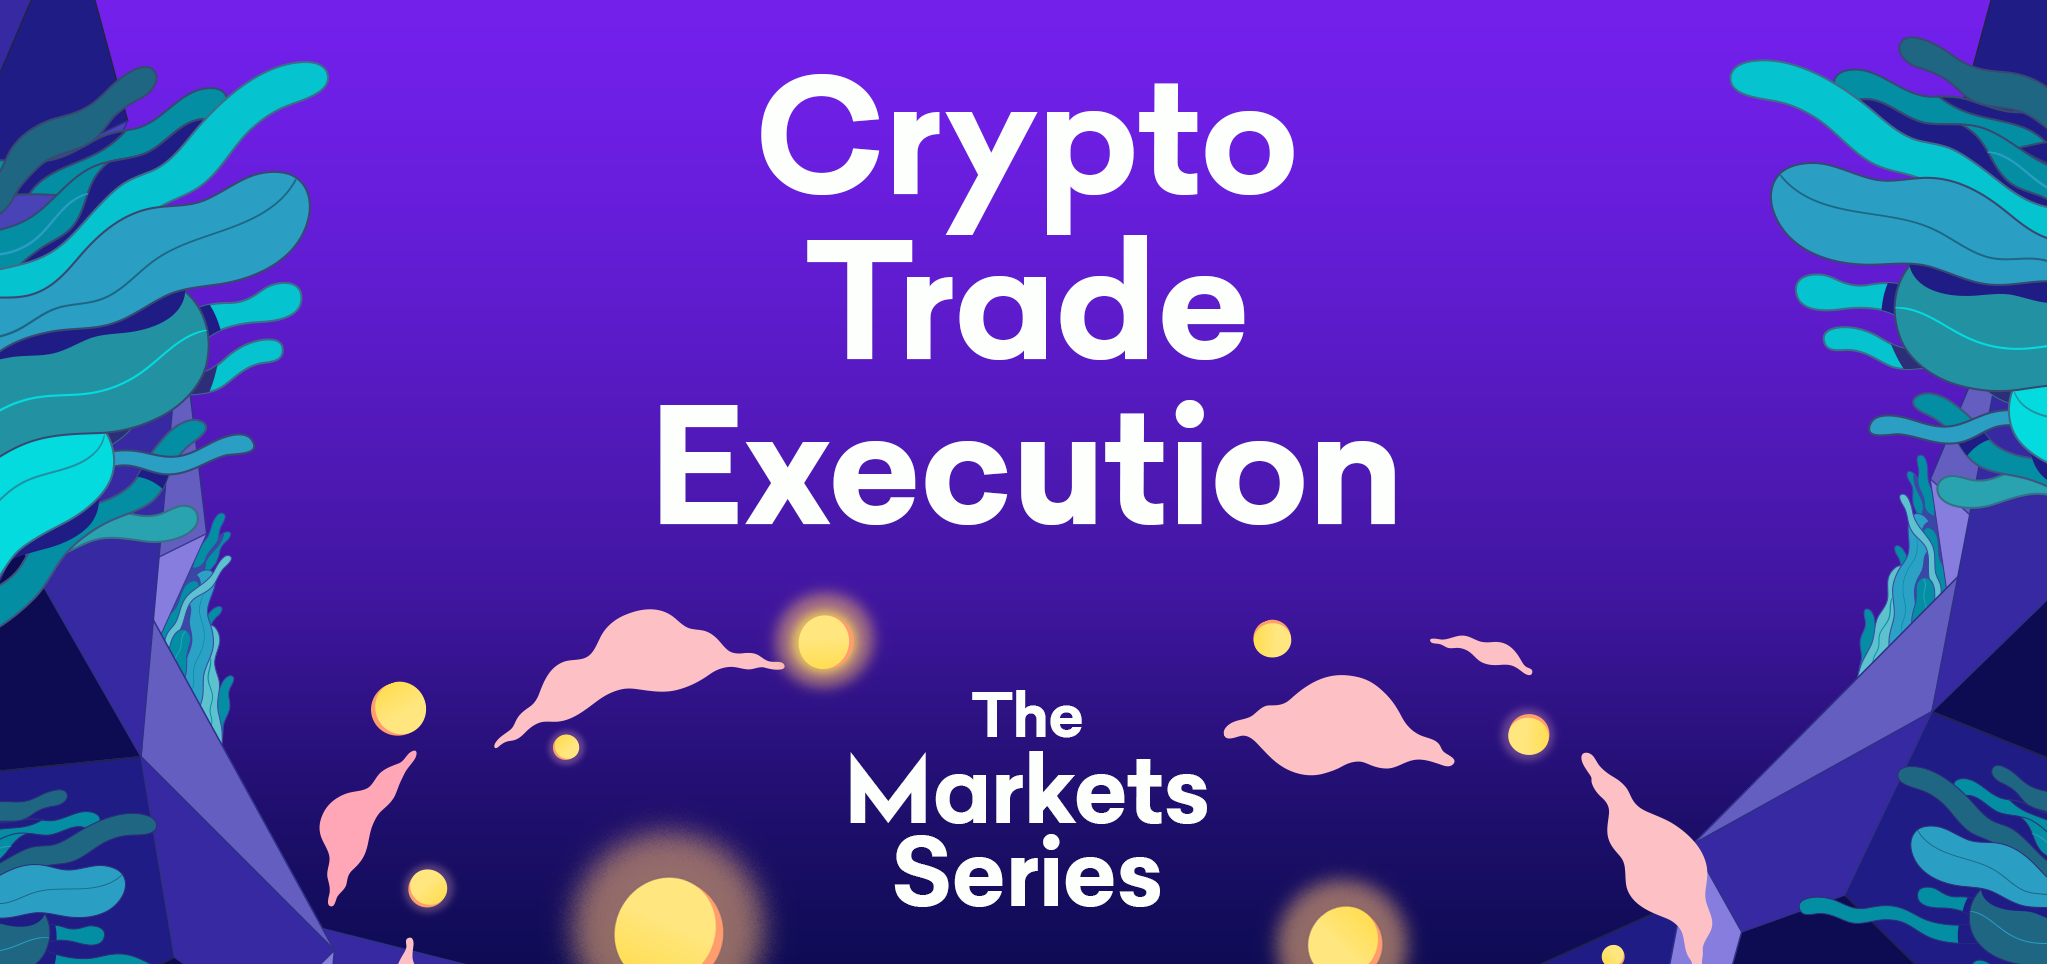 The Markets Series – Part 3: Crypto Trade Execution - What Type of Trader are You?